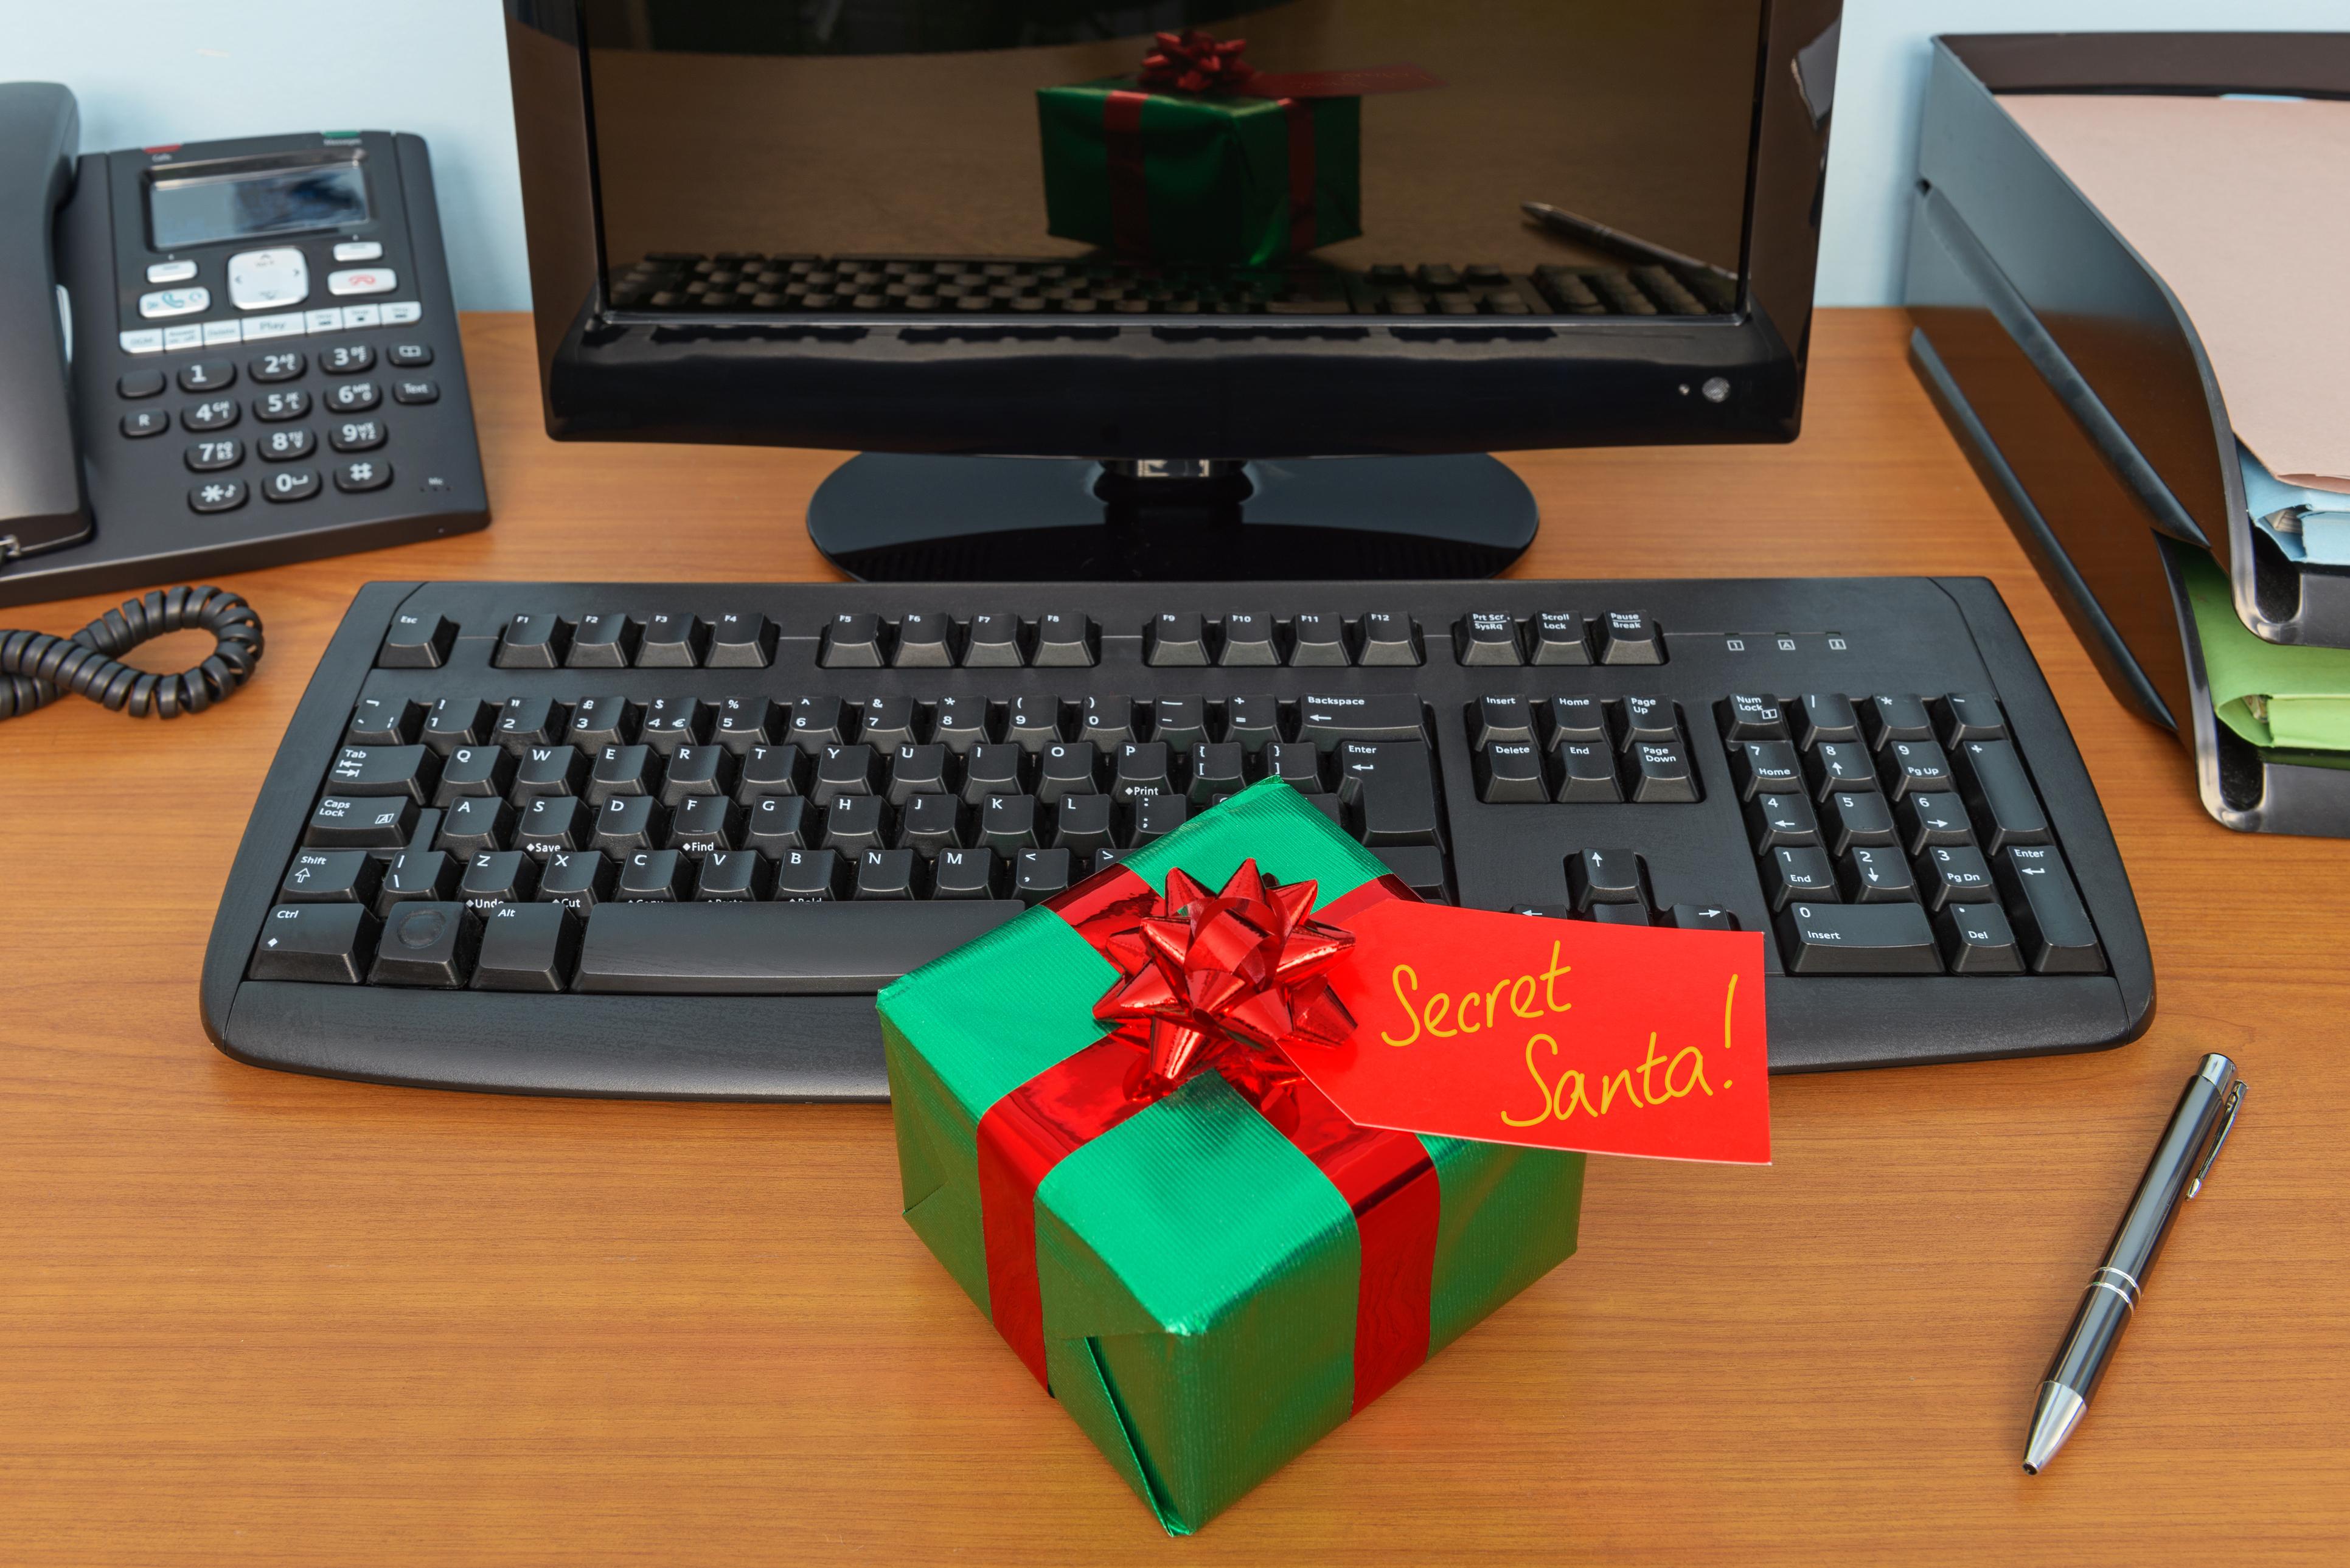 Holiday Stress Here s Some Fun Ways To Do Secret Santa At Work